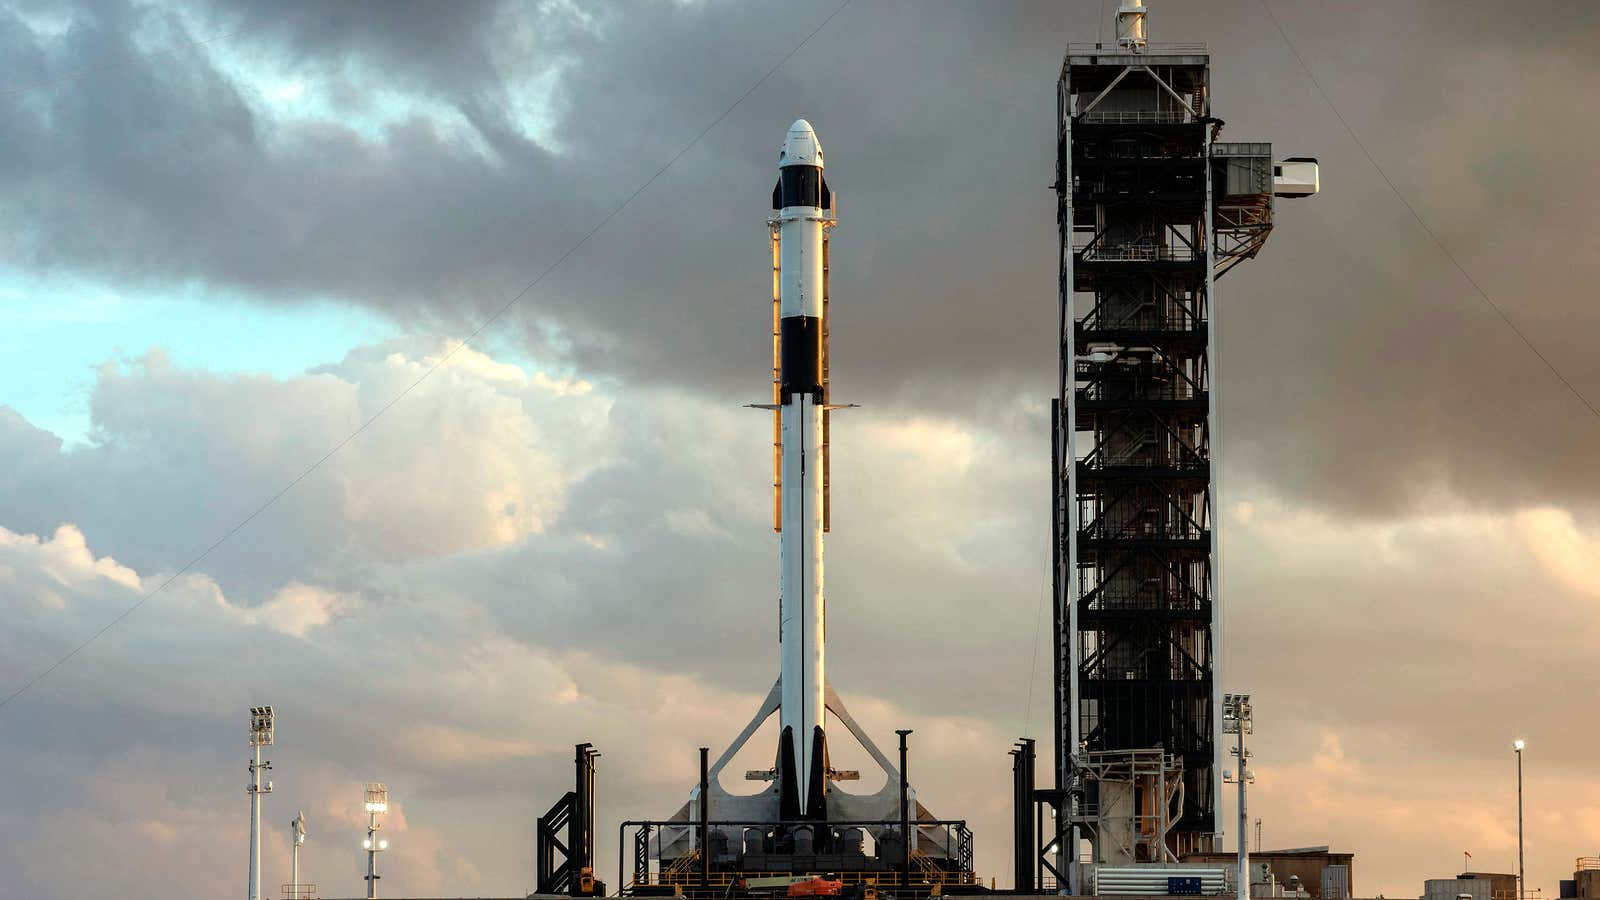 The Crew Dragon on the launchpad ahead of a prior test flight in March 2019.